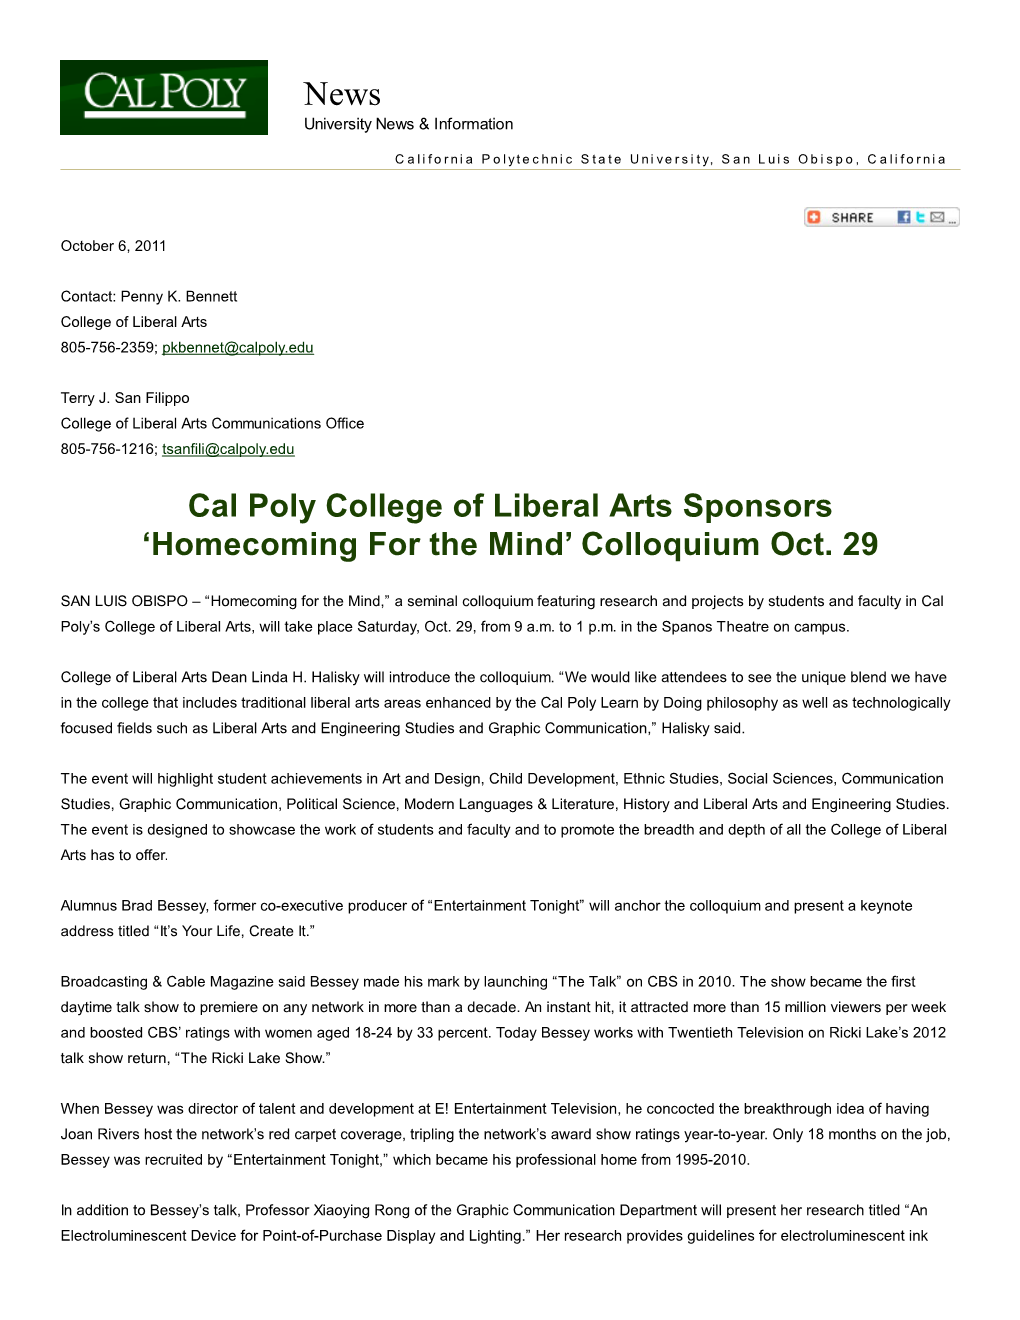 Cal Poly College of Liberal Arts Sponsors